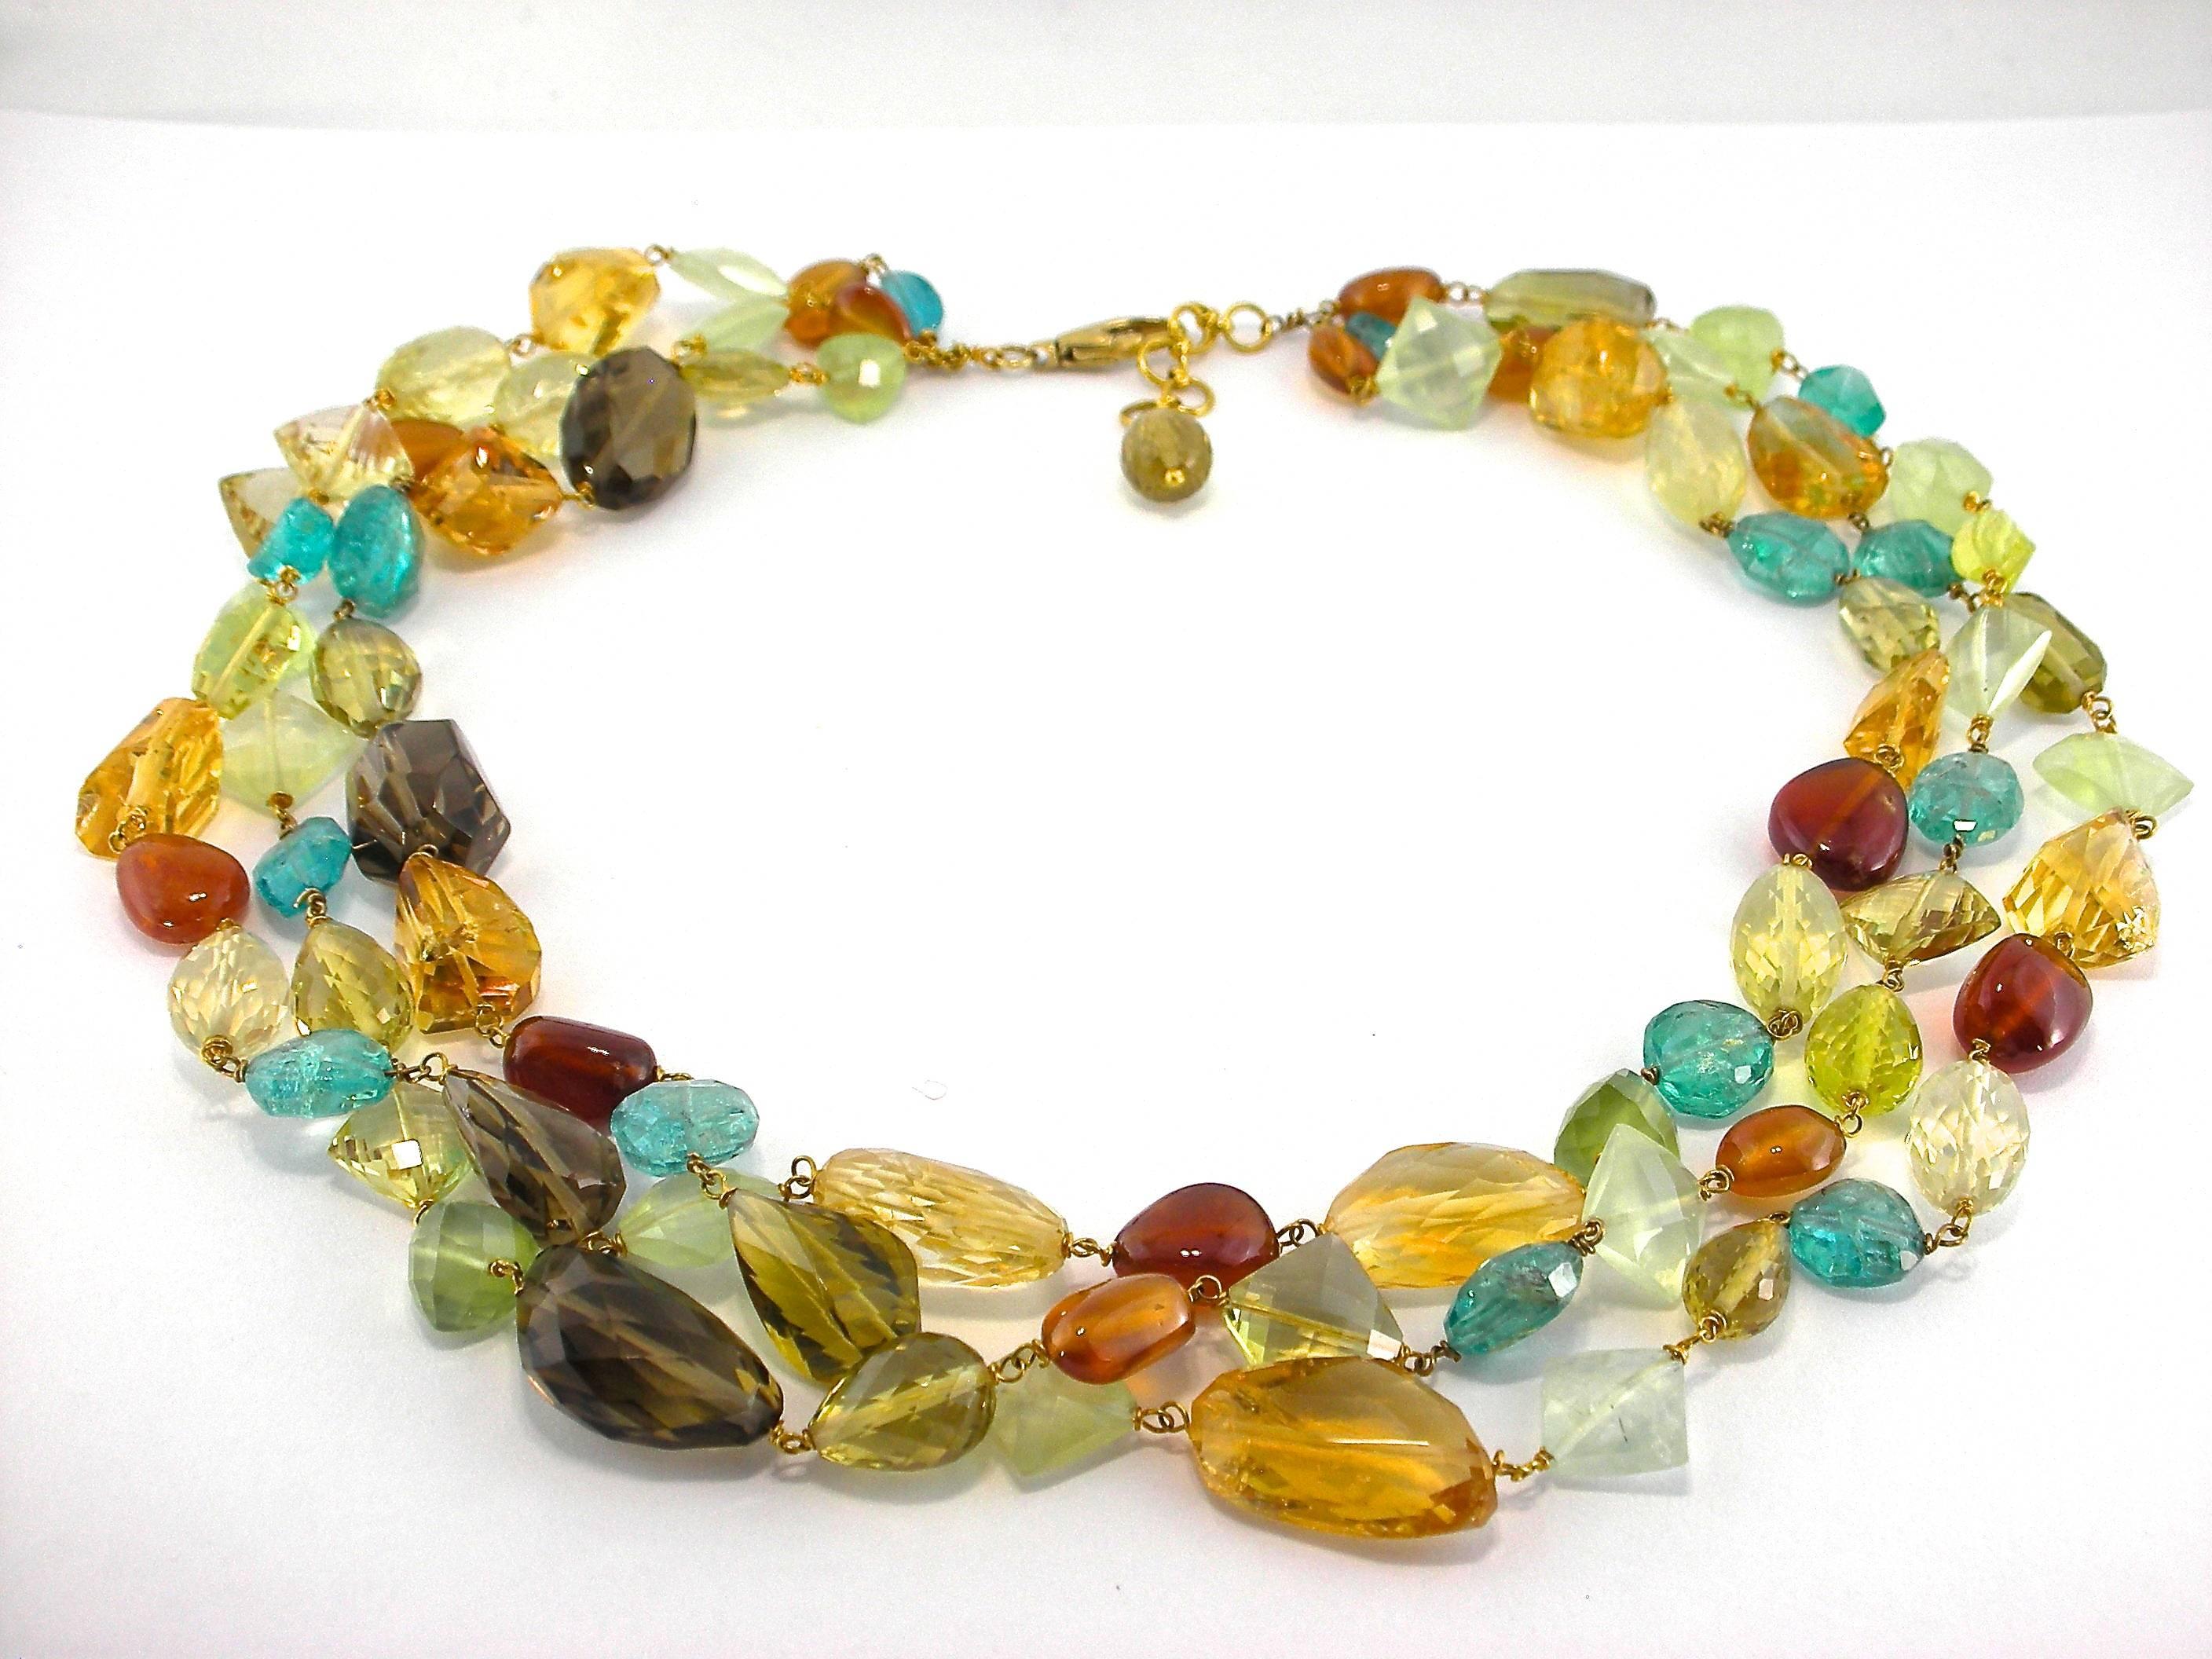 Jona design collection, hand crafted in Italy, 18 karat yellow gold multi-strand necklace, featuring 445 carats of grey and citrine quartz, carnelian, apatite and prehnite pebbles.

All Jona jewelry is new and has never been previously owned or